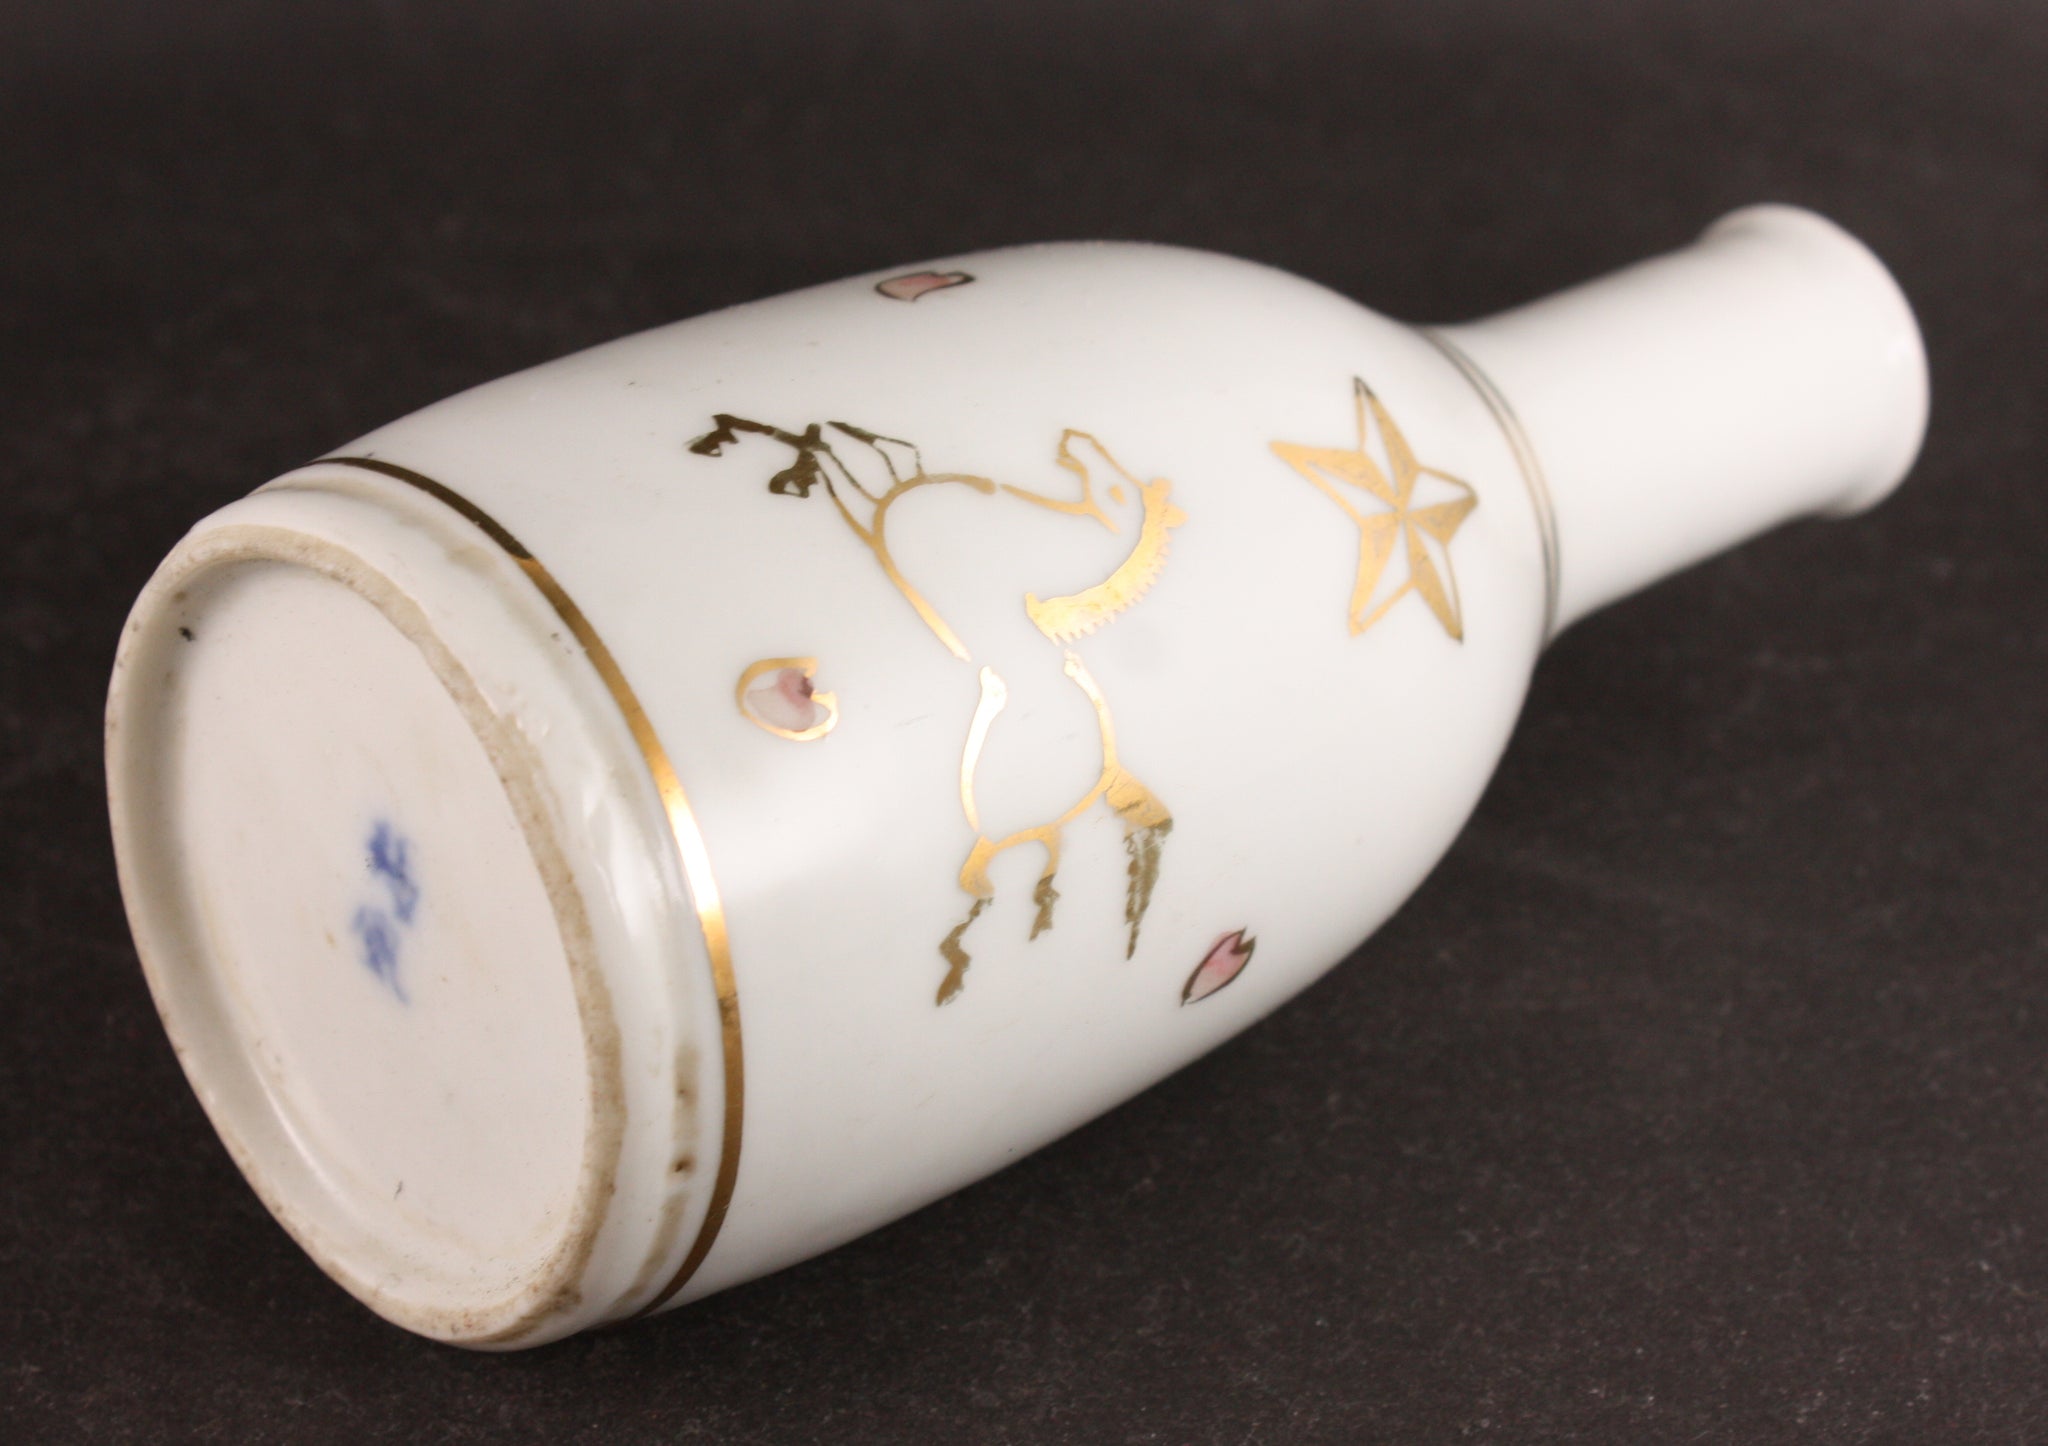 Antique Japanese Military Cavalry Horse Star Army Sake Bottle